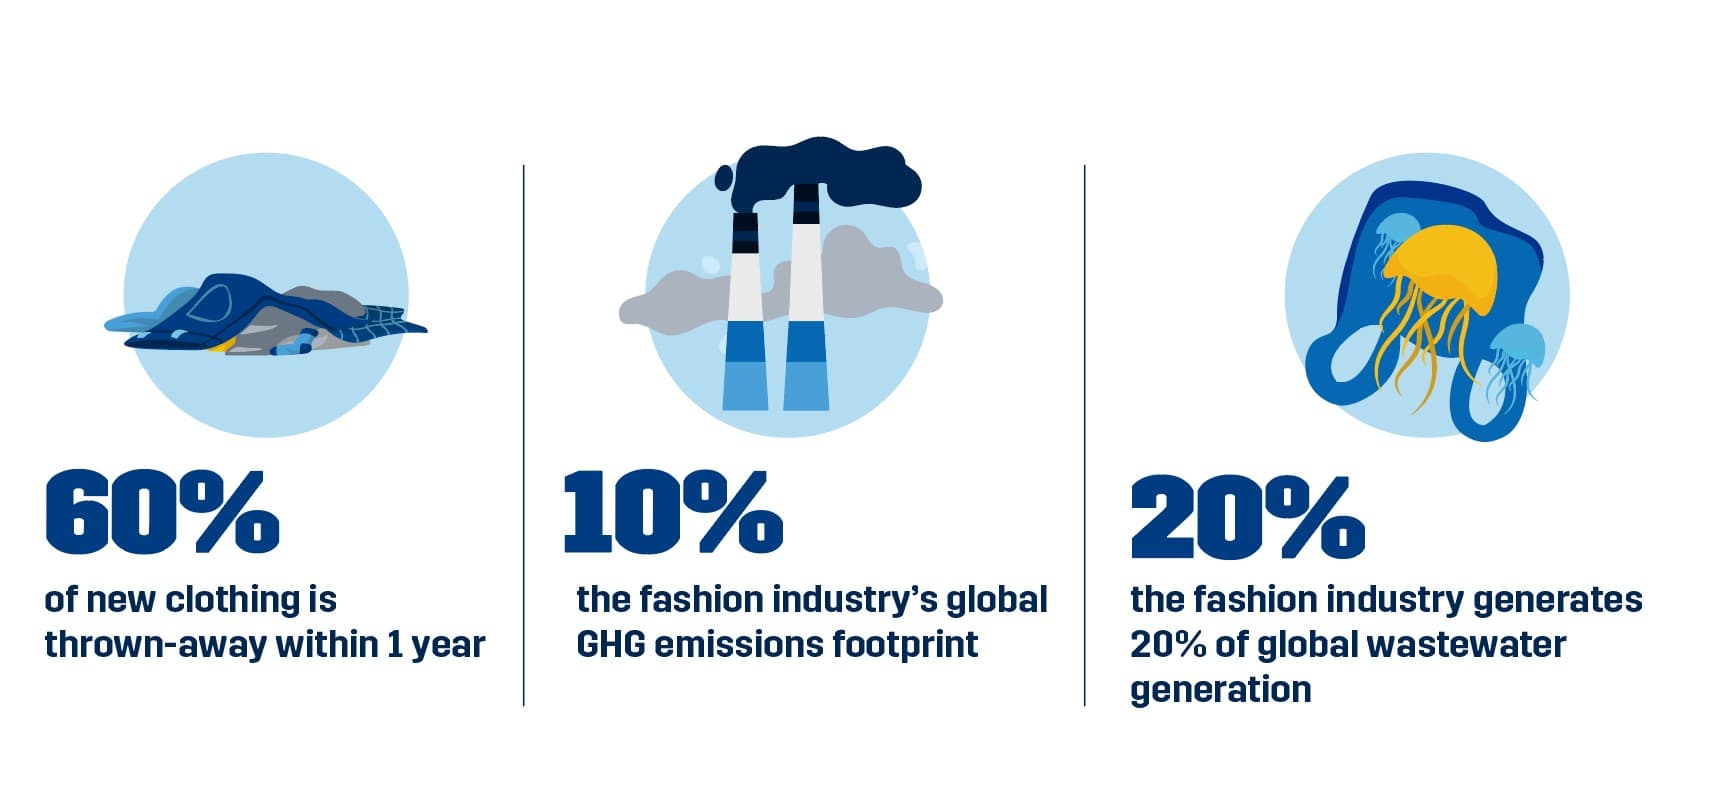 Fast Fashions’ Impacts to Global Environment